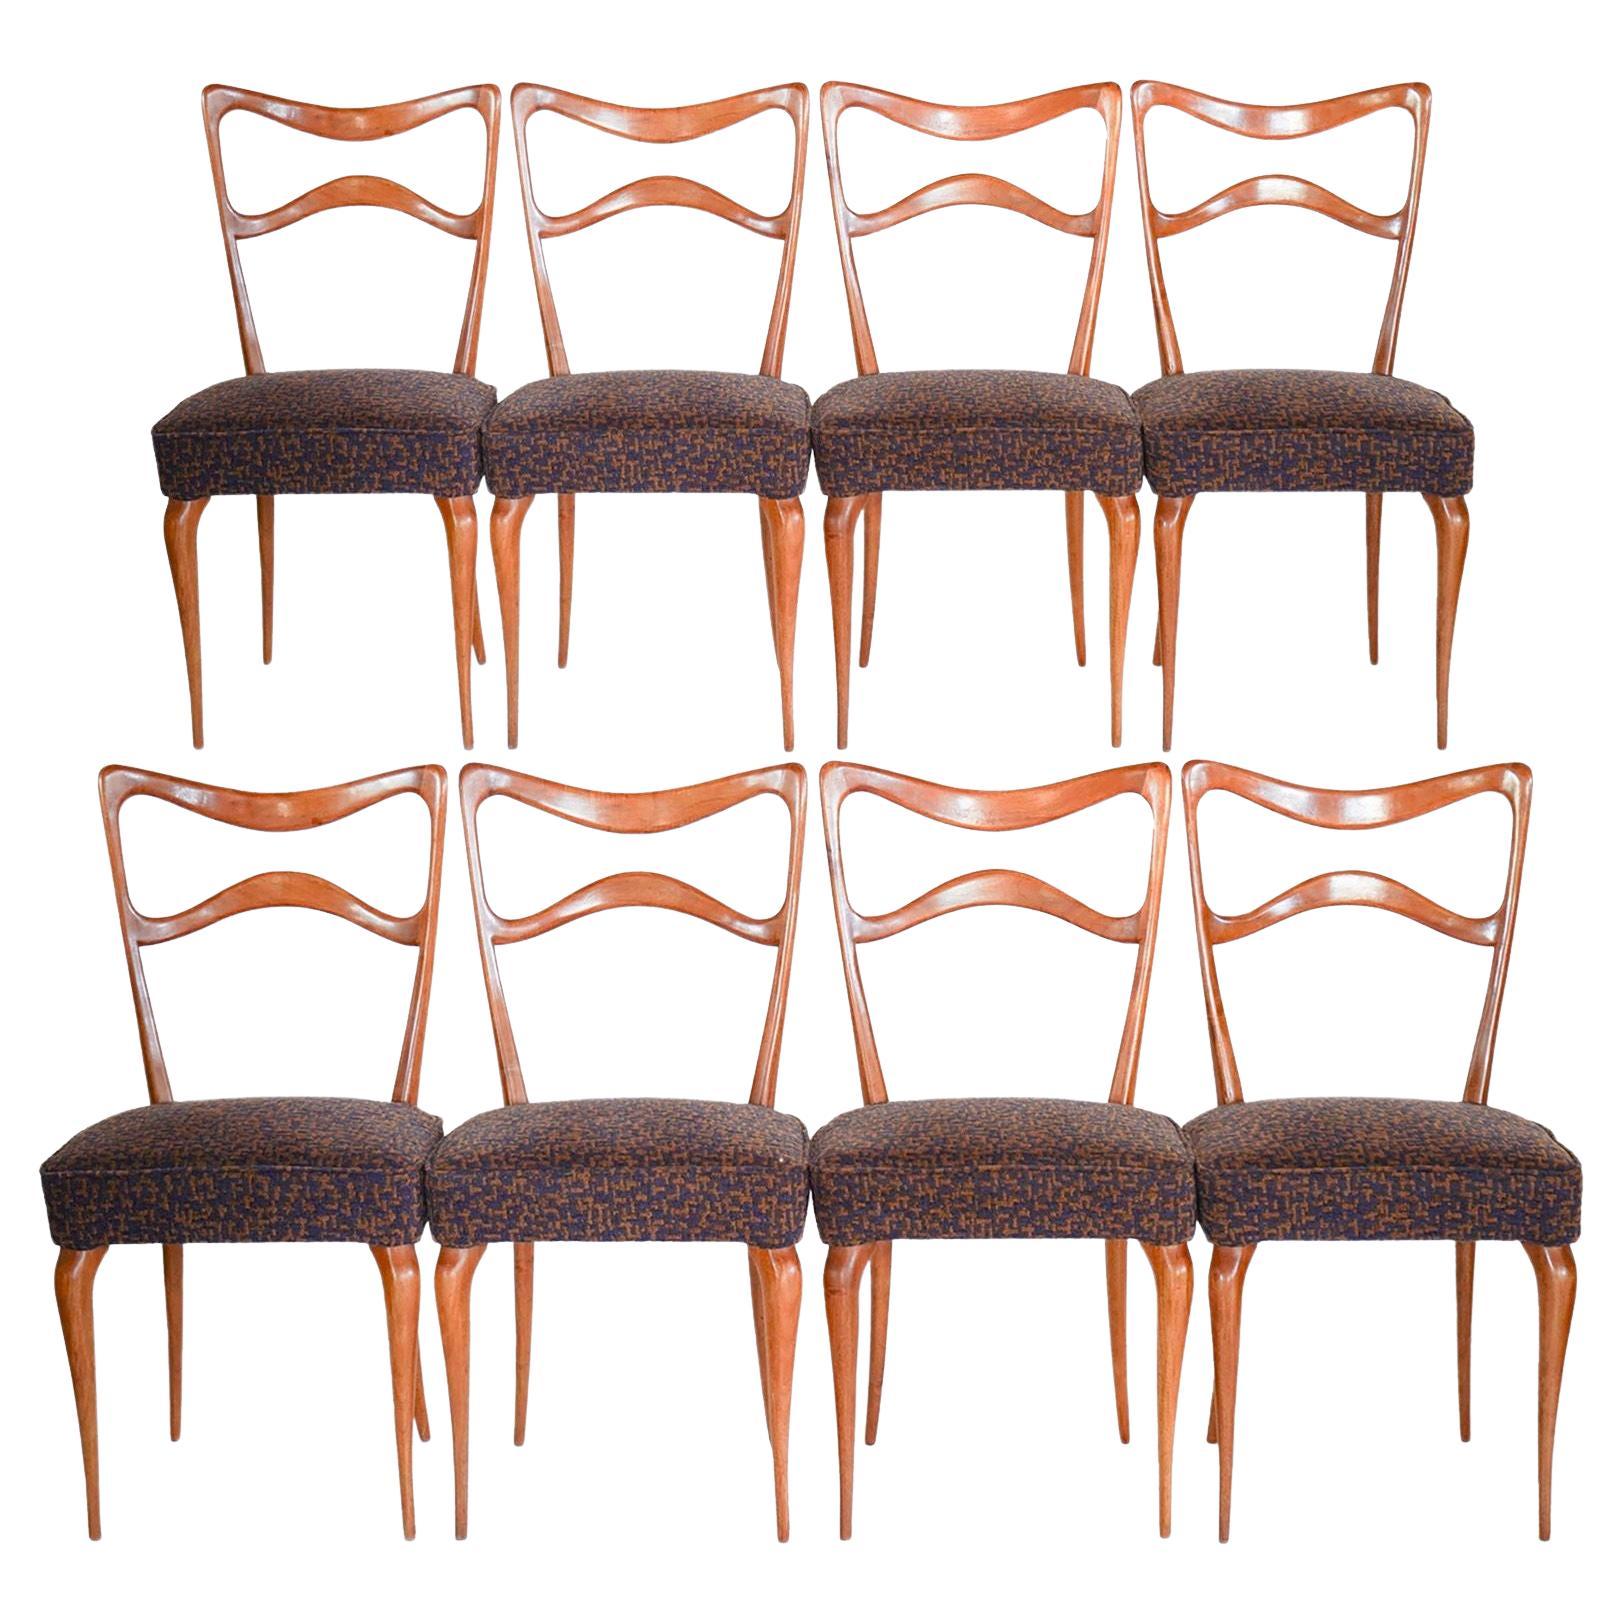 Armonia Walnut Dining Chair, Set of 8, Silvio Piattelli design made in Italy For Sale